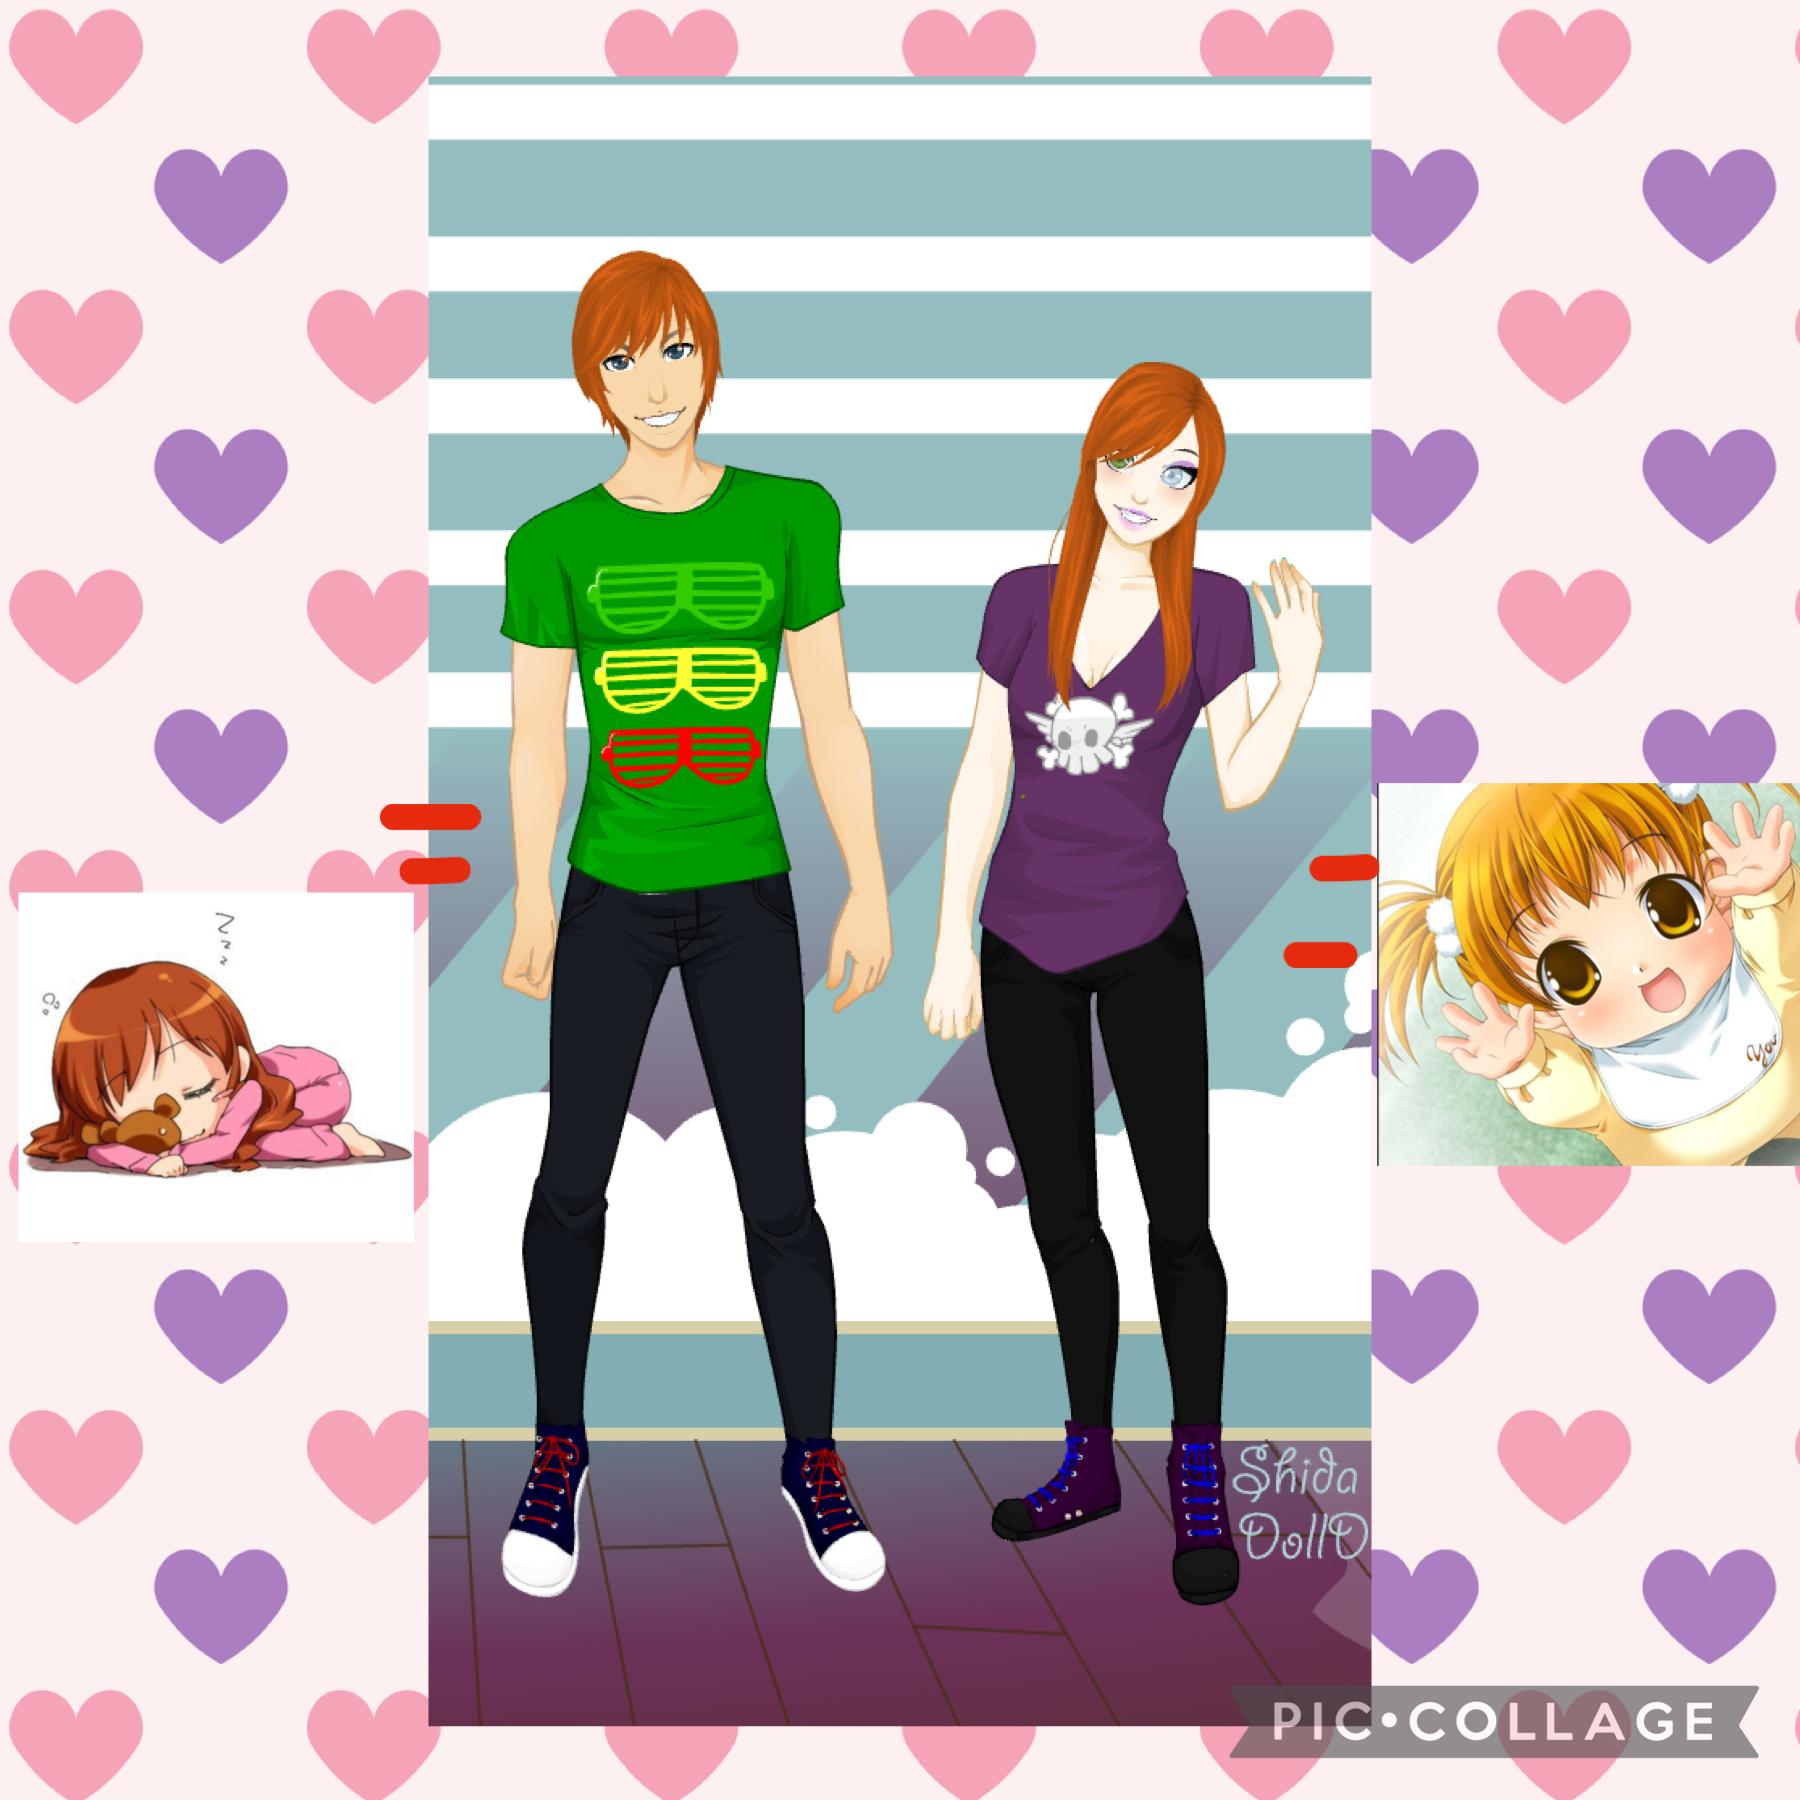 Anime couple equals CUTE BABY GIRLS!!!